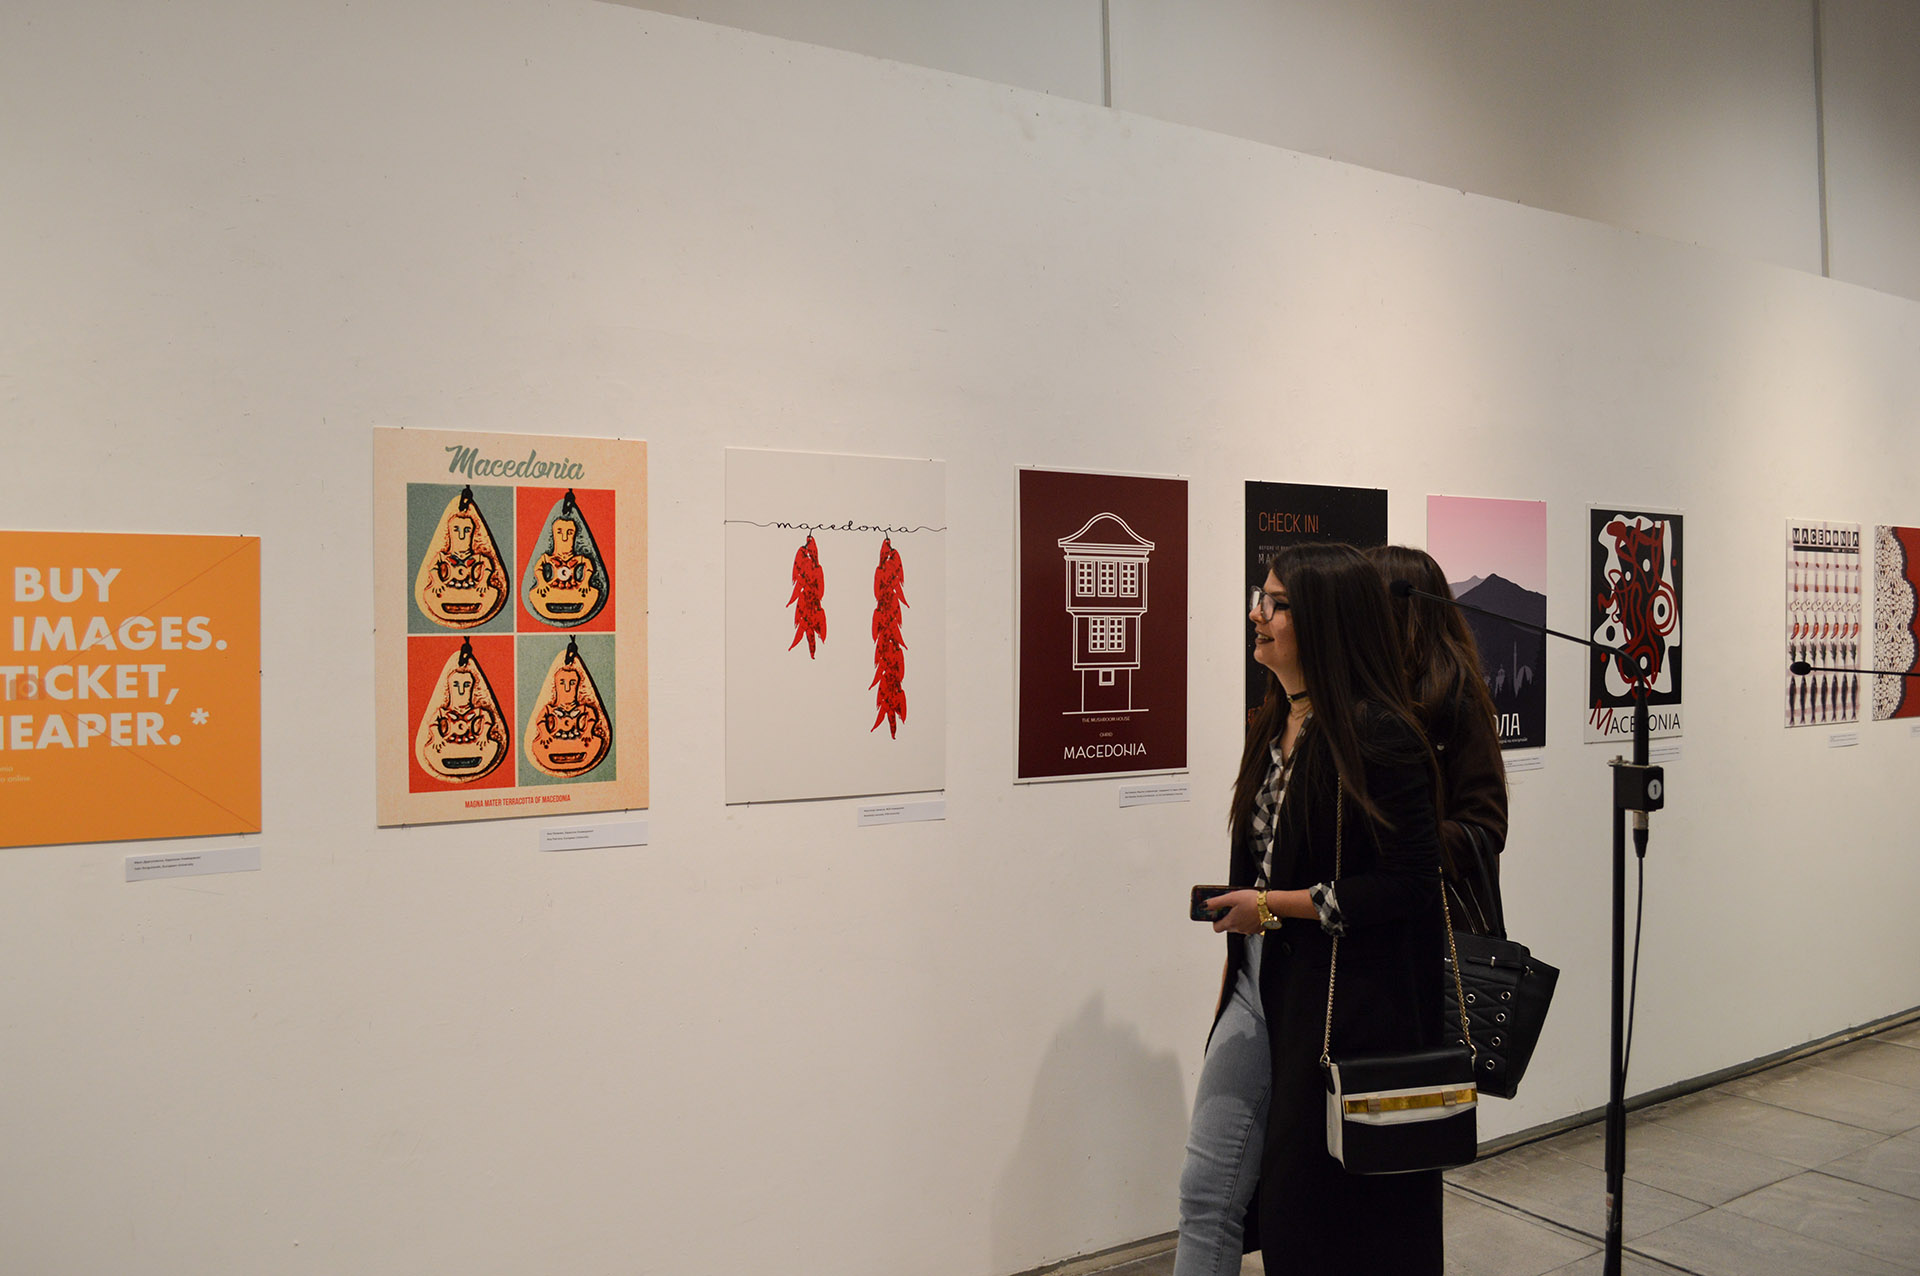 Exhibition of posters “Republic of Macedonia as Travel Destination”